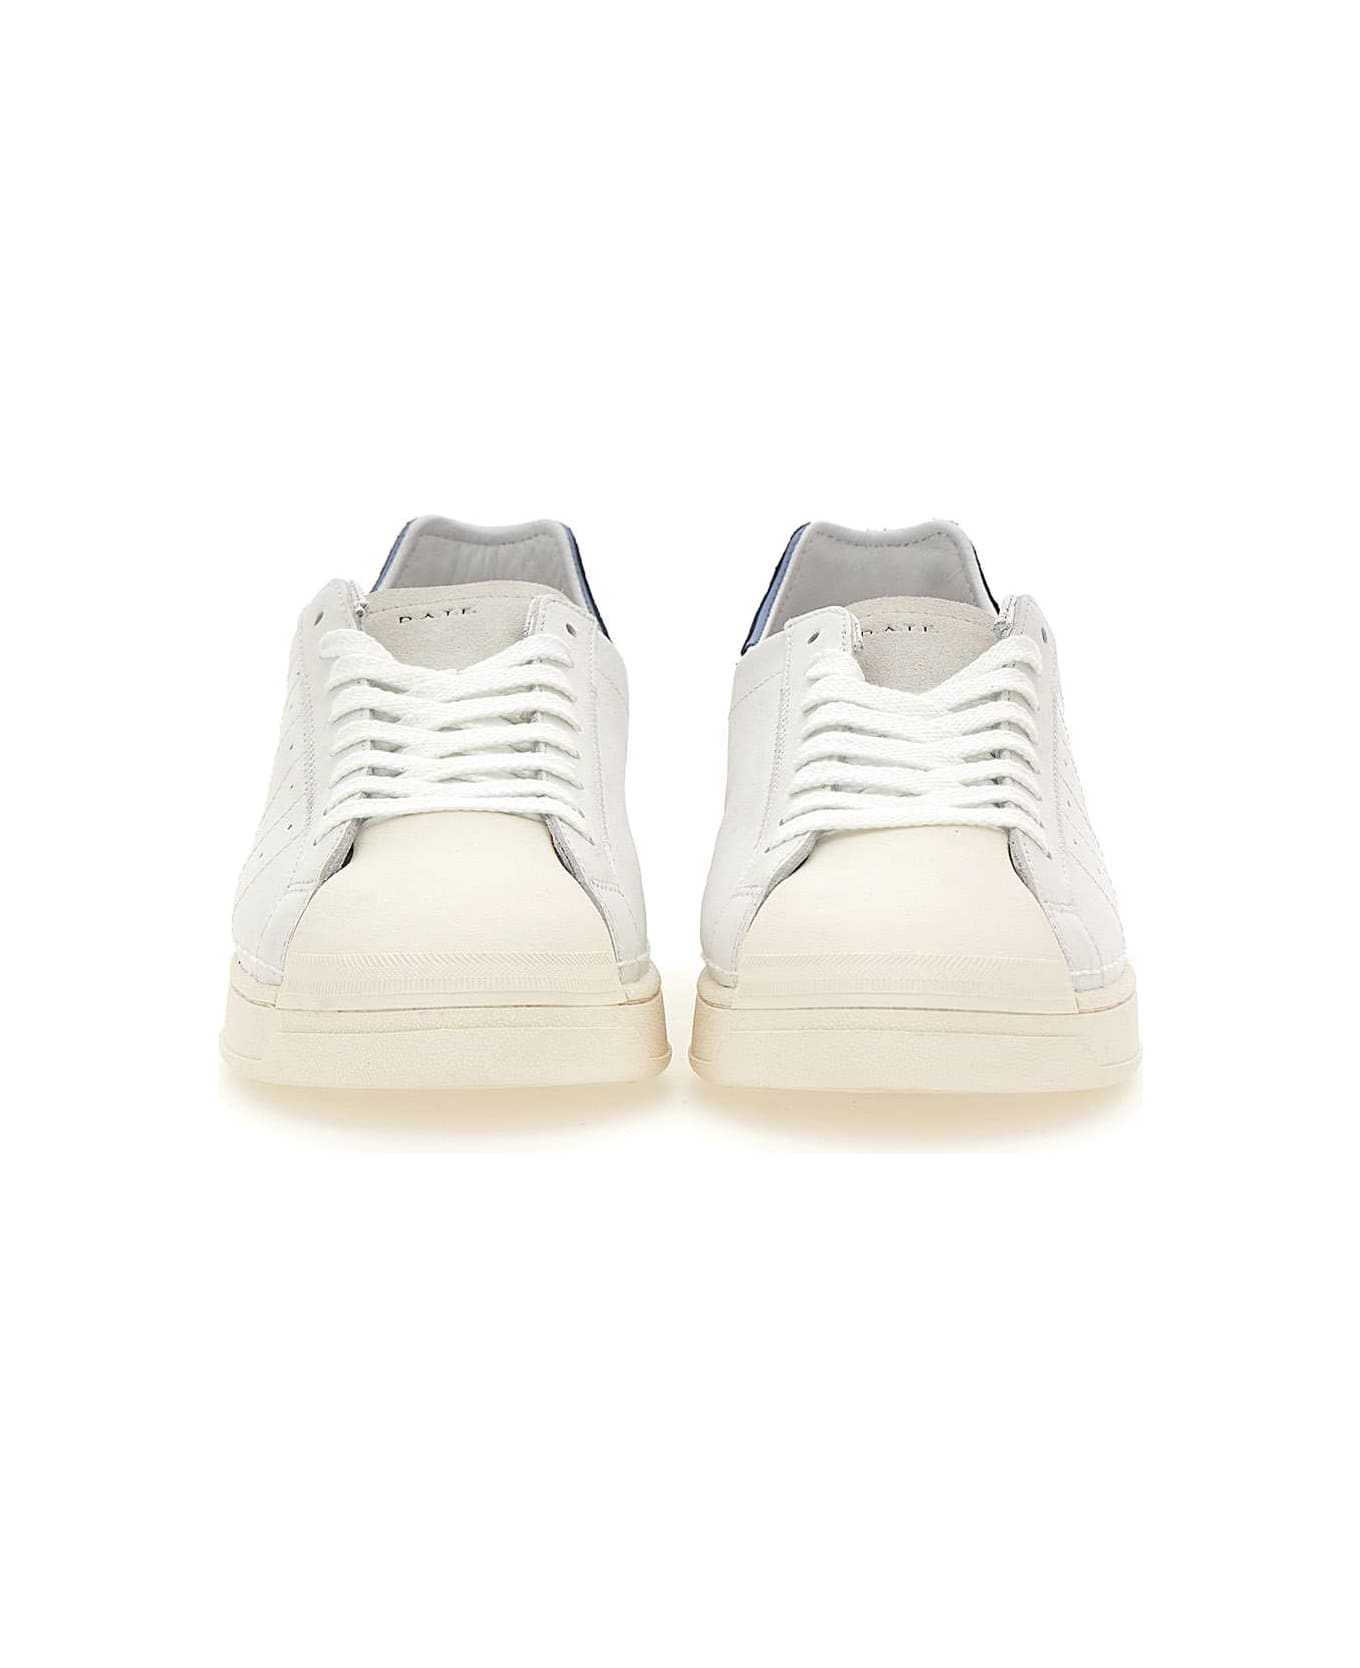 D.A.T.E. "base Calf" Leather Sneakers - WHITE-BLUE スニーカー